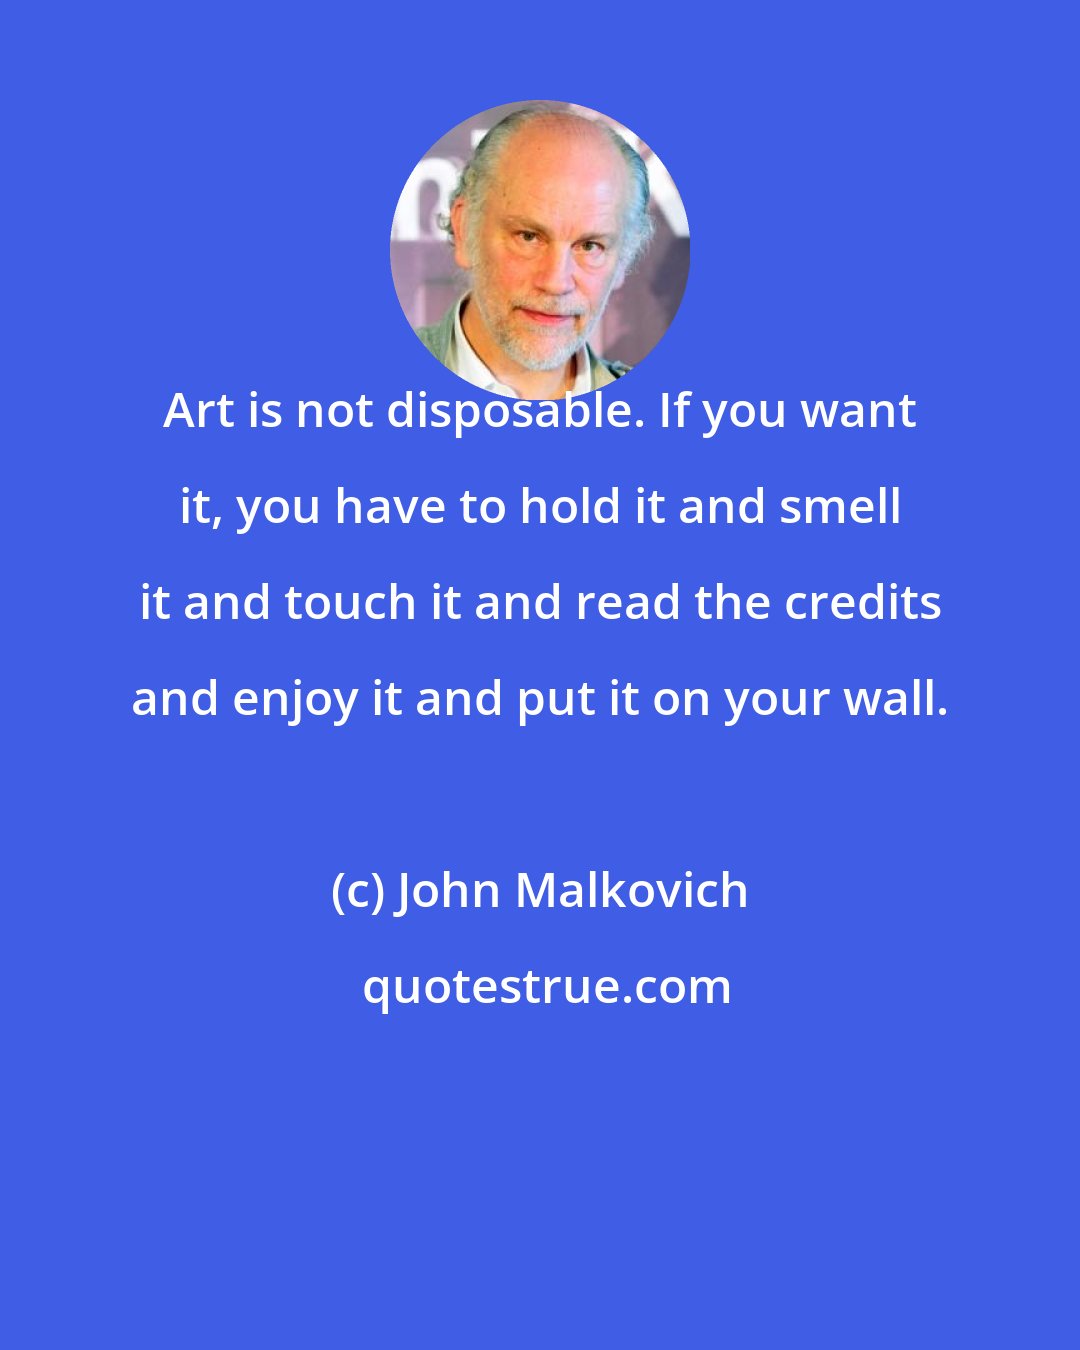 John Malkovich: Art is not disposable. If you want it, you have to hold it and smell it and touch it and read the credits and enjoy it and put it on your wall.